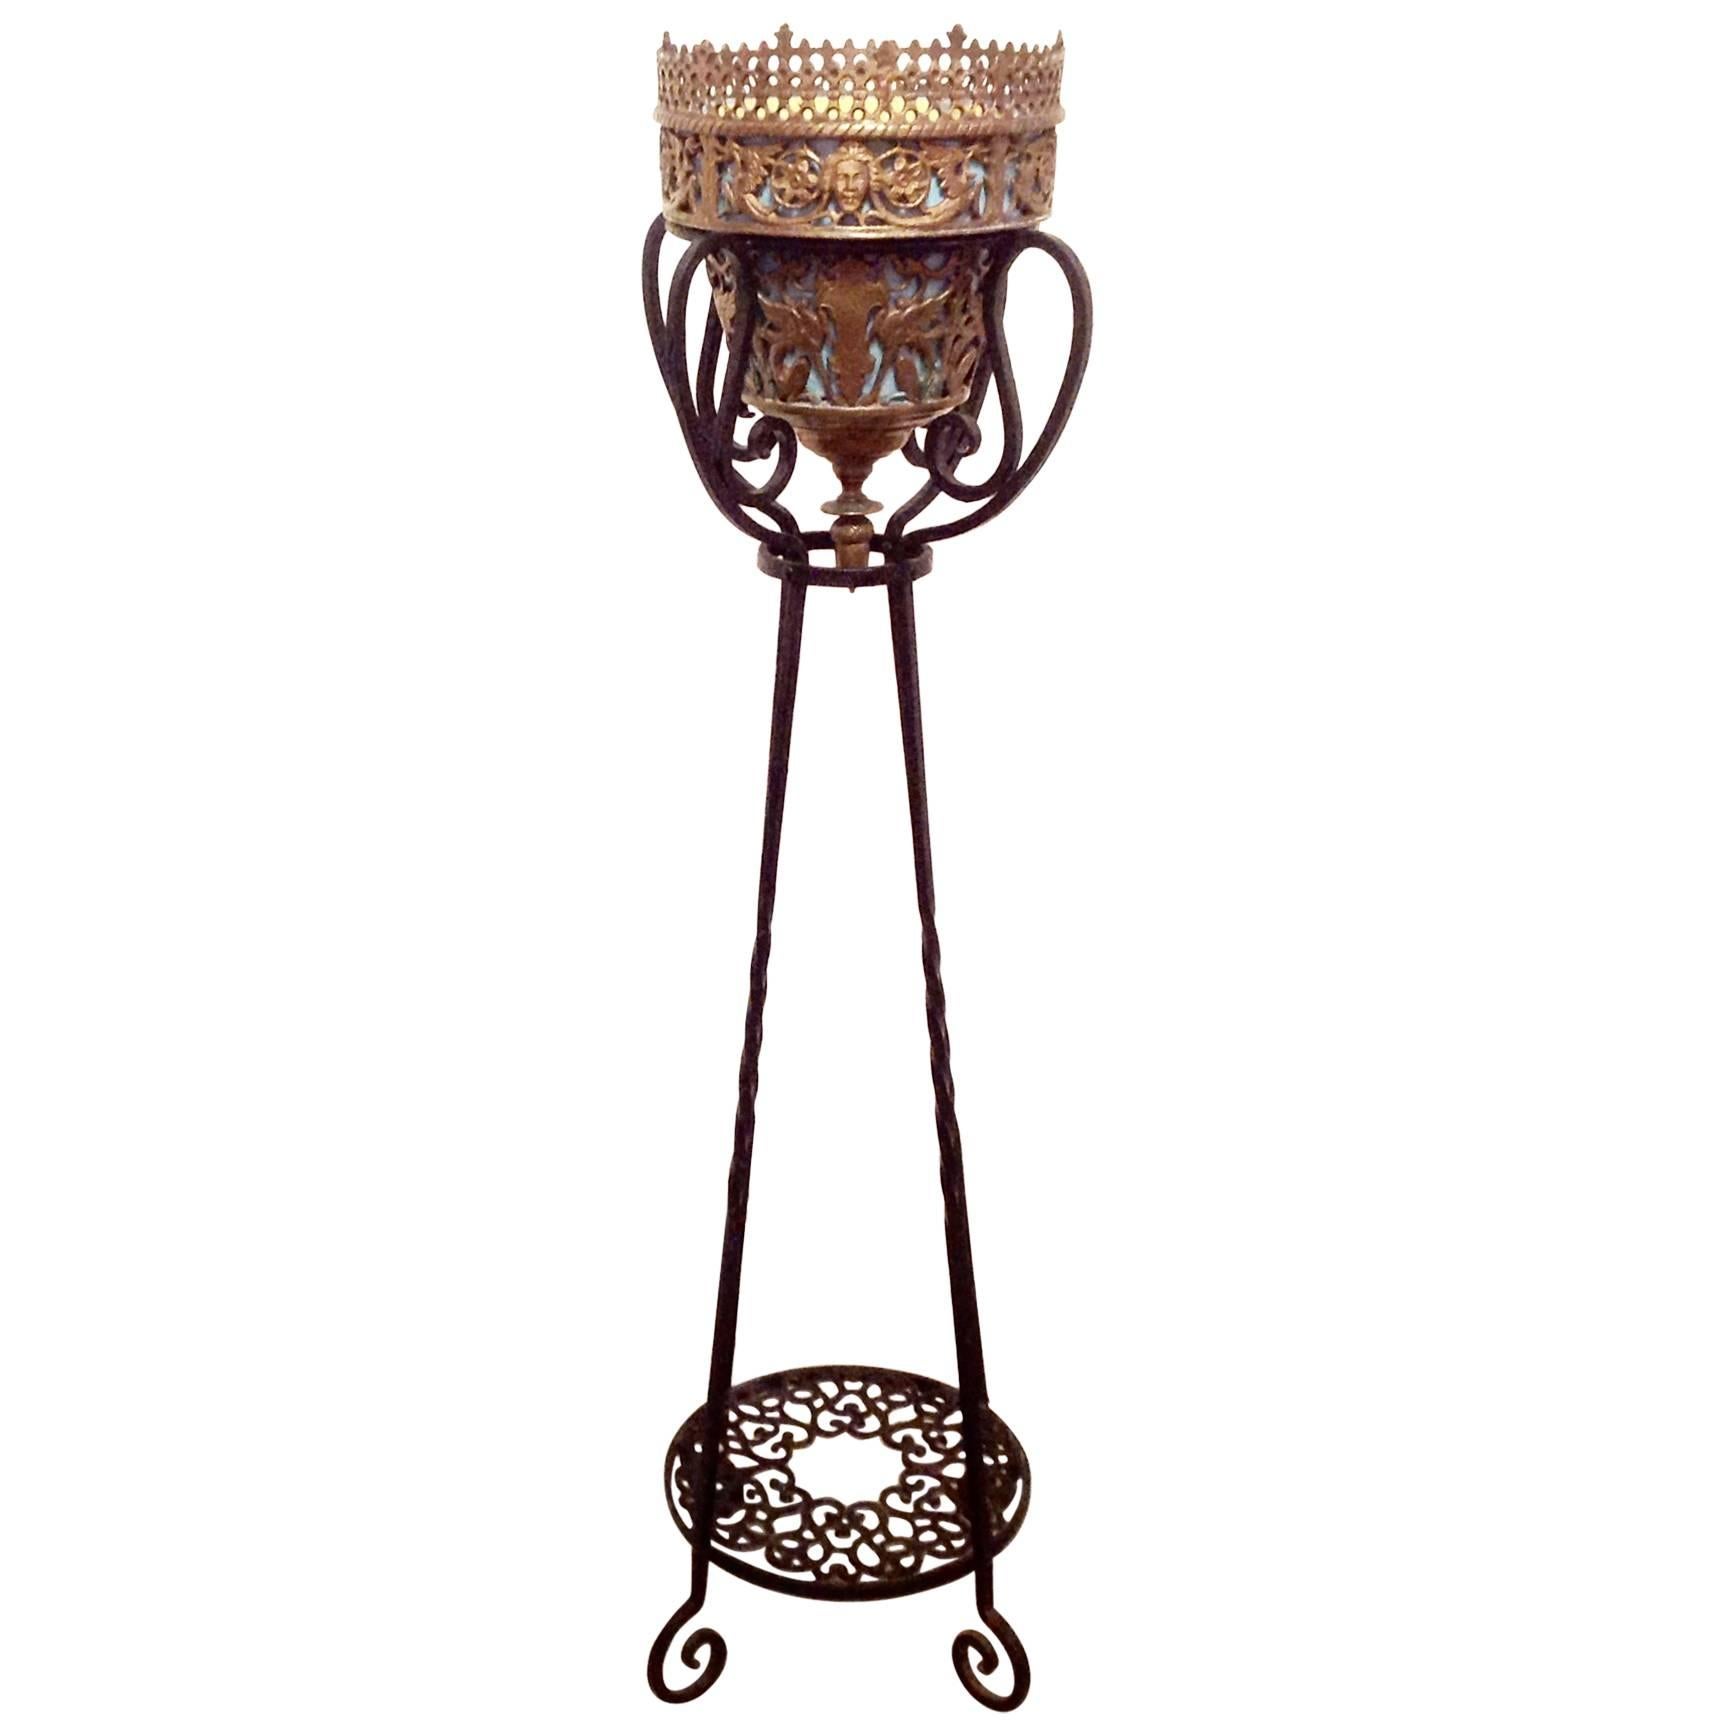 Rare Oscar Bach Wrought Iron and Bronze Standing Planter For Sale